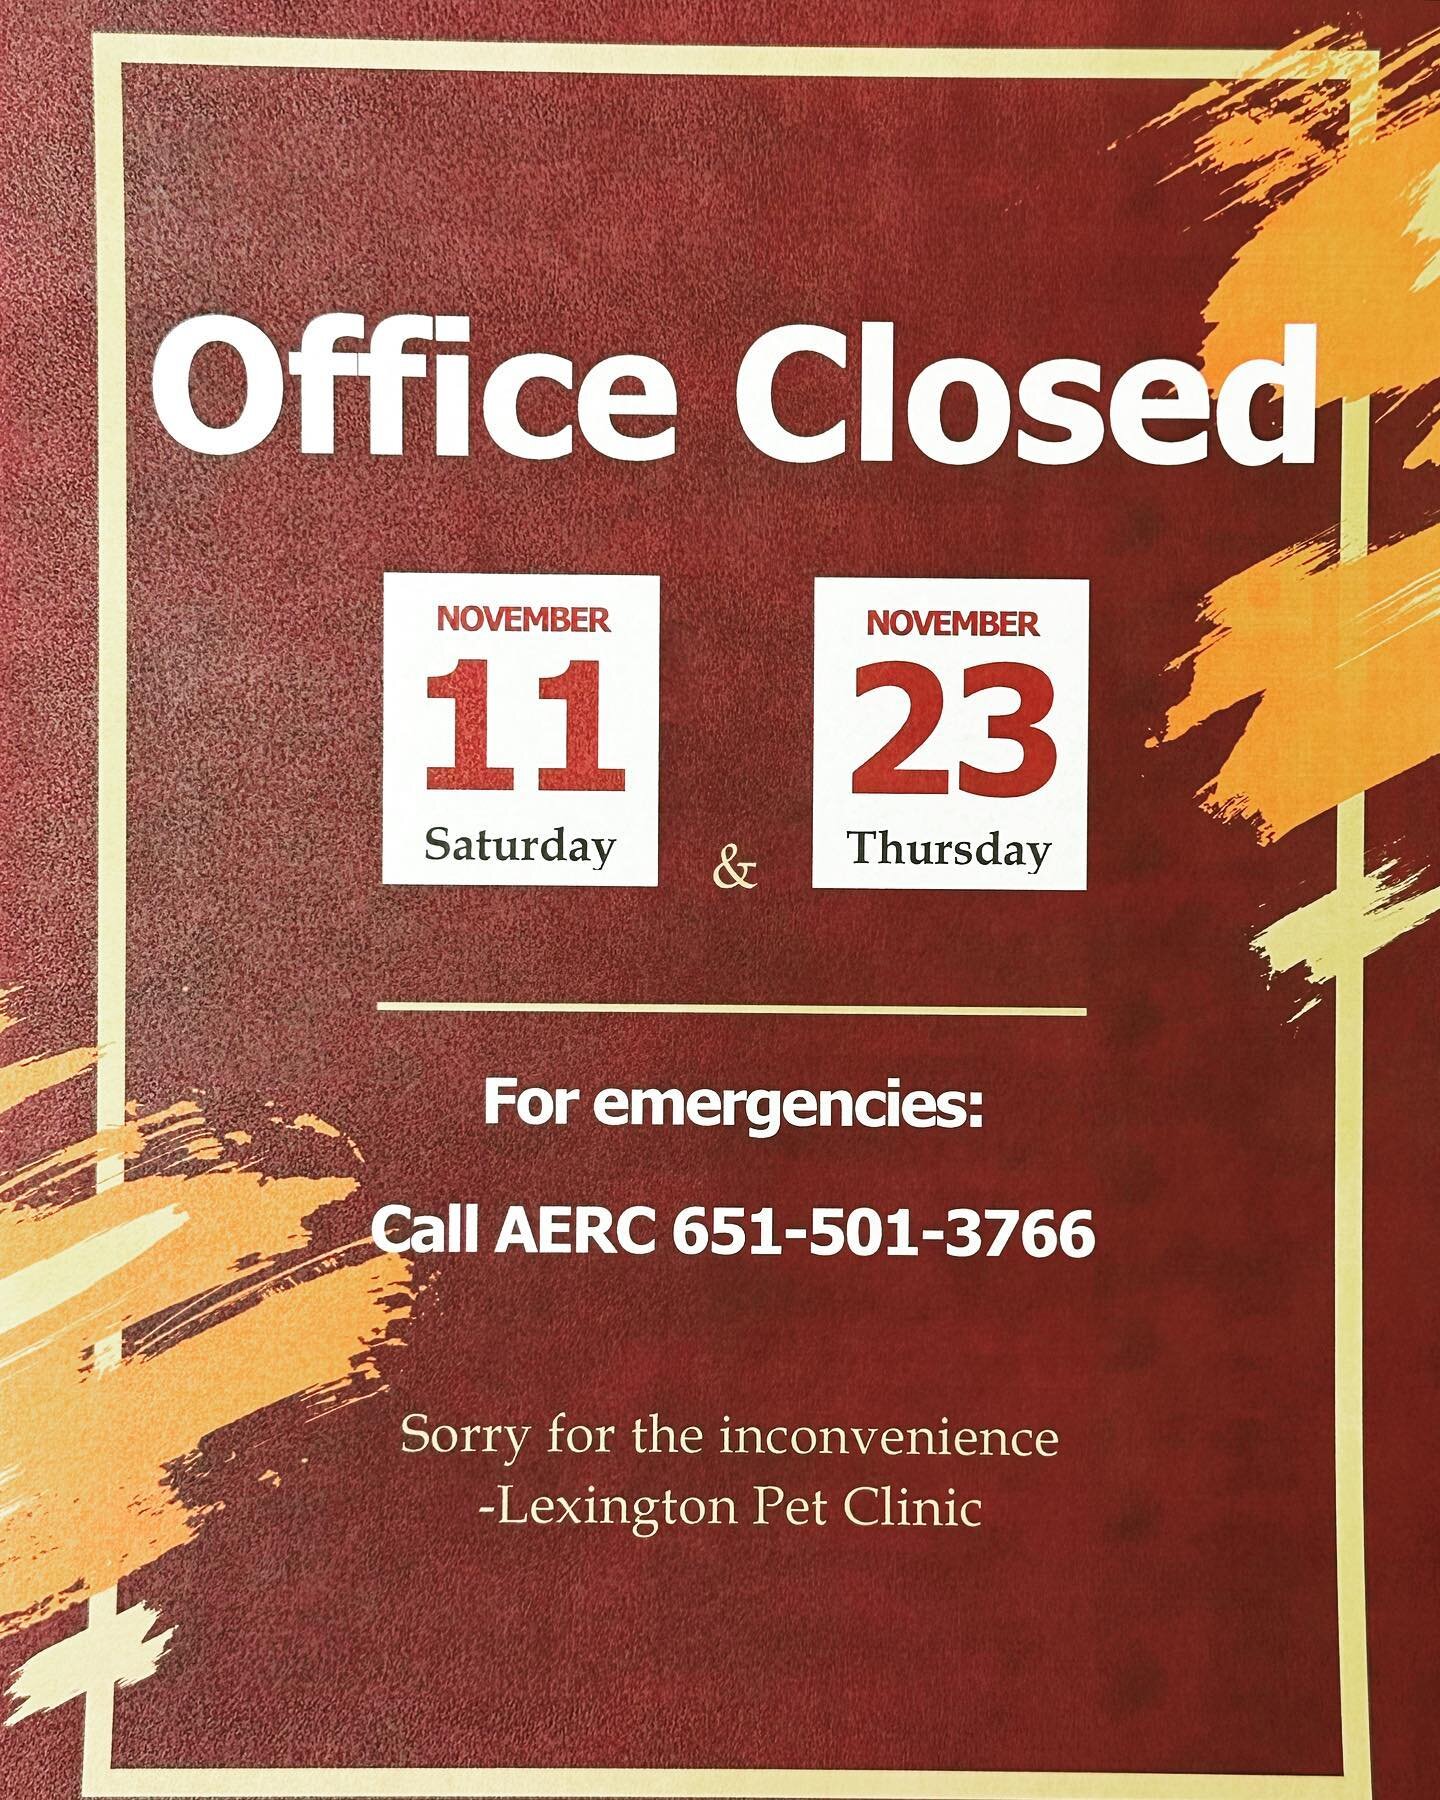 🍁 Office Closed:
November 11th &amp; 23rd 🍂